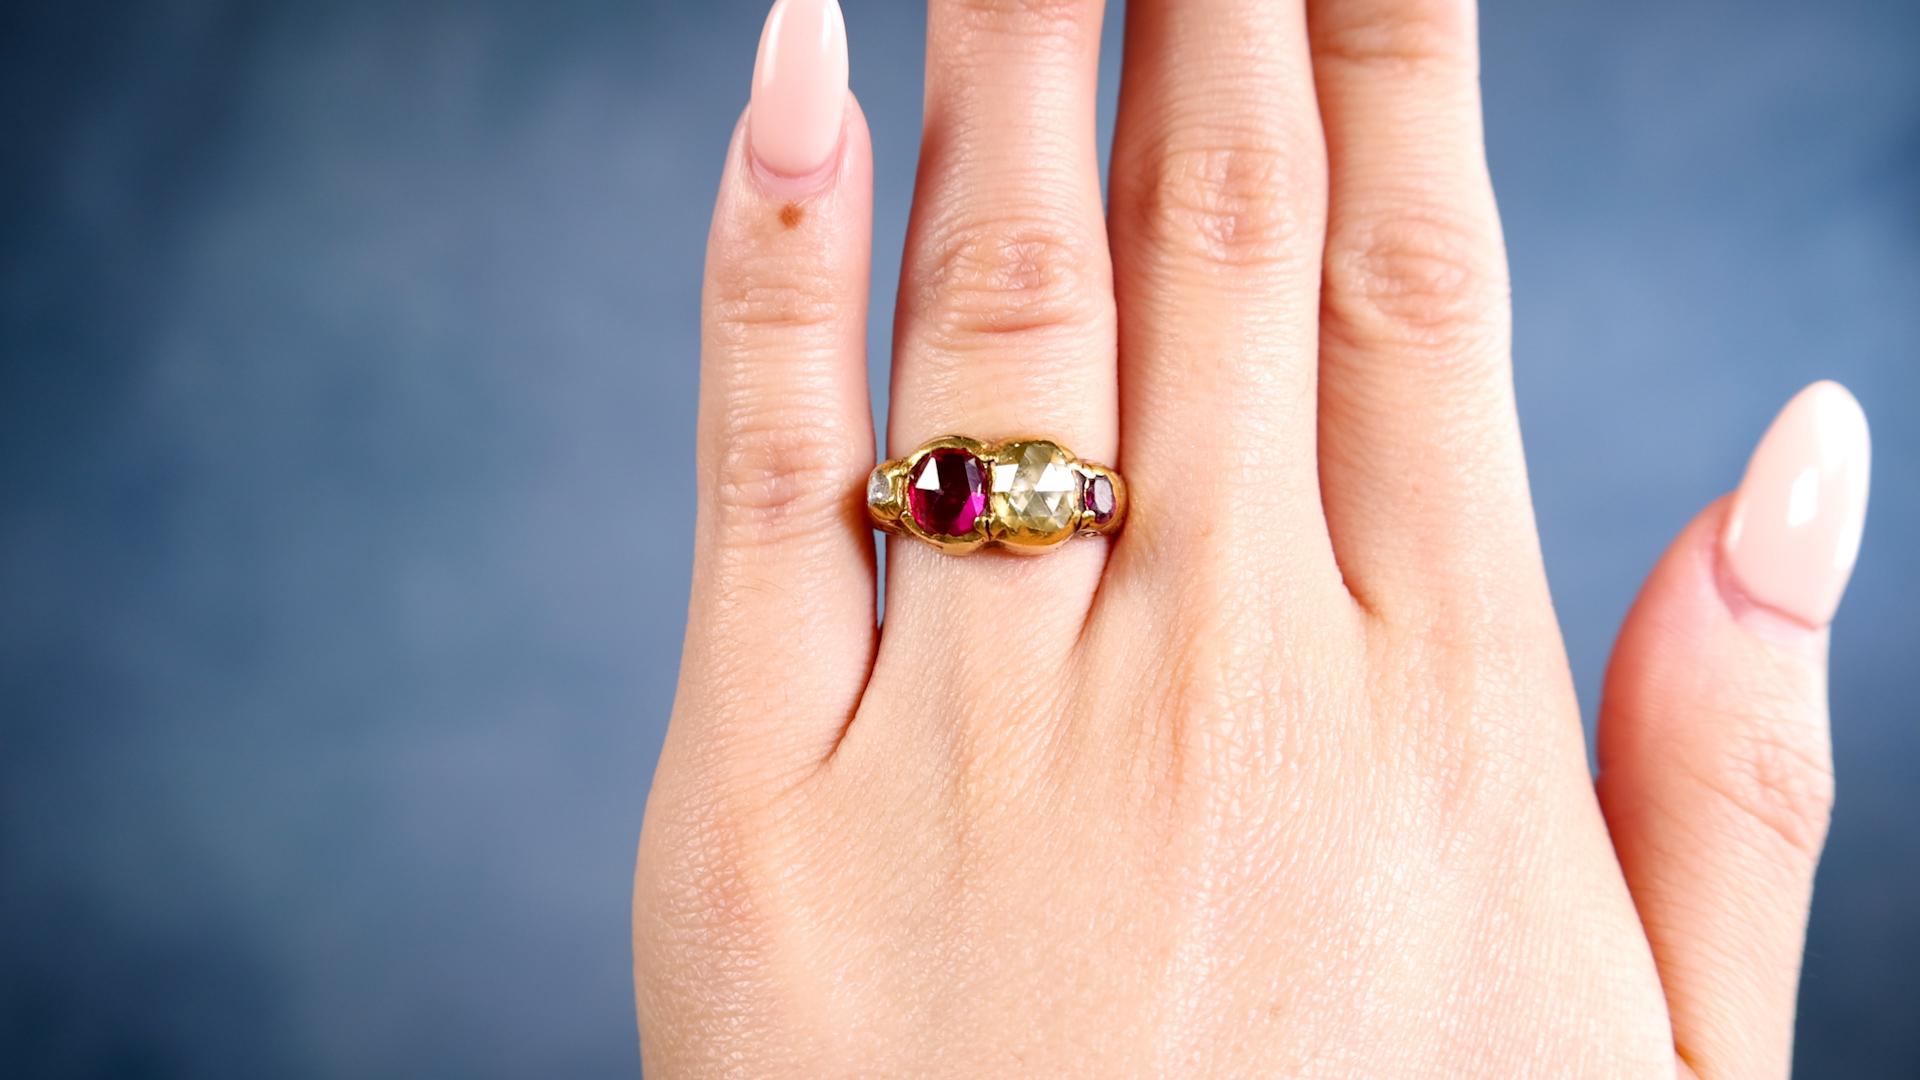 One Late Victorian Diamond and Synthetic Ruby 14k Yellow Gold Ring. Featuring one rose cut diamond weighing approximately 0.50 carat, graded S-T color, I1 clarity, and one rose cut synthetic ruby weighing approximately 0.90 carat. Accented by one